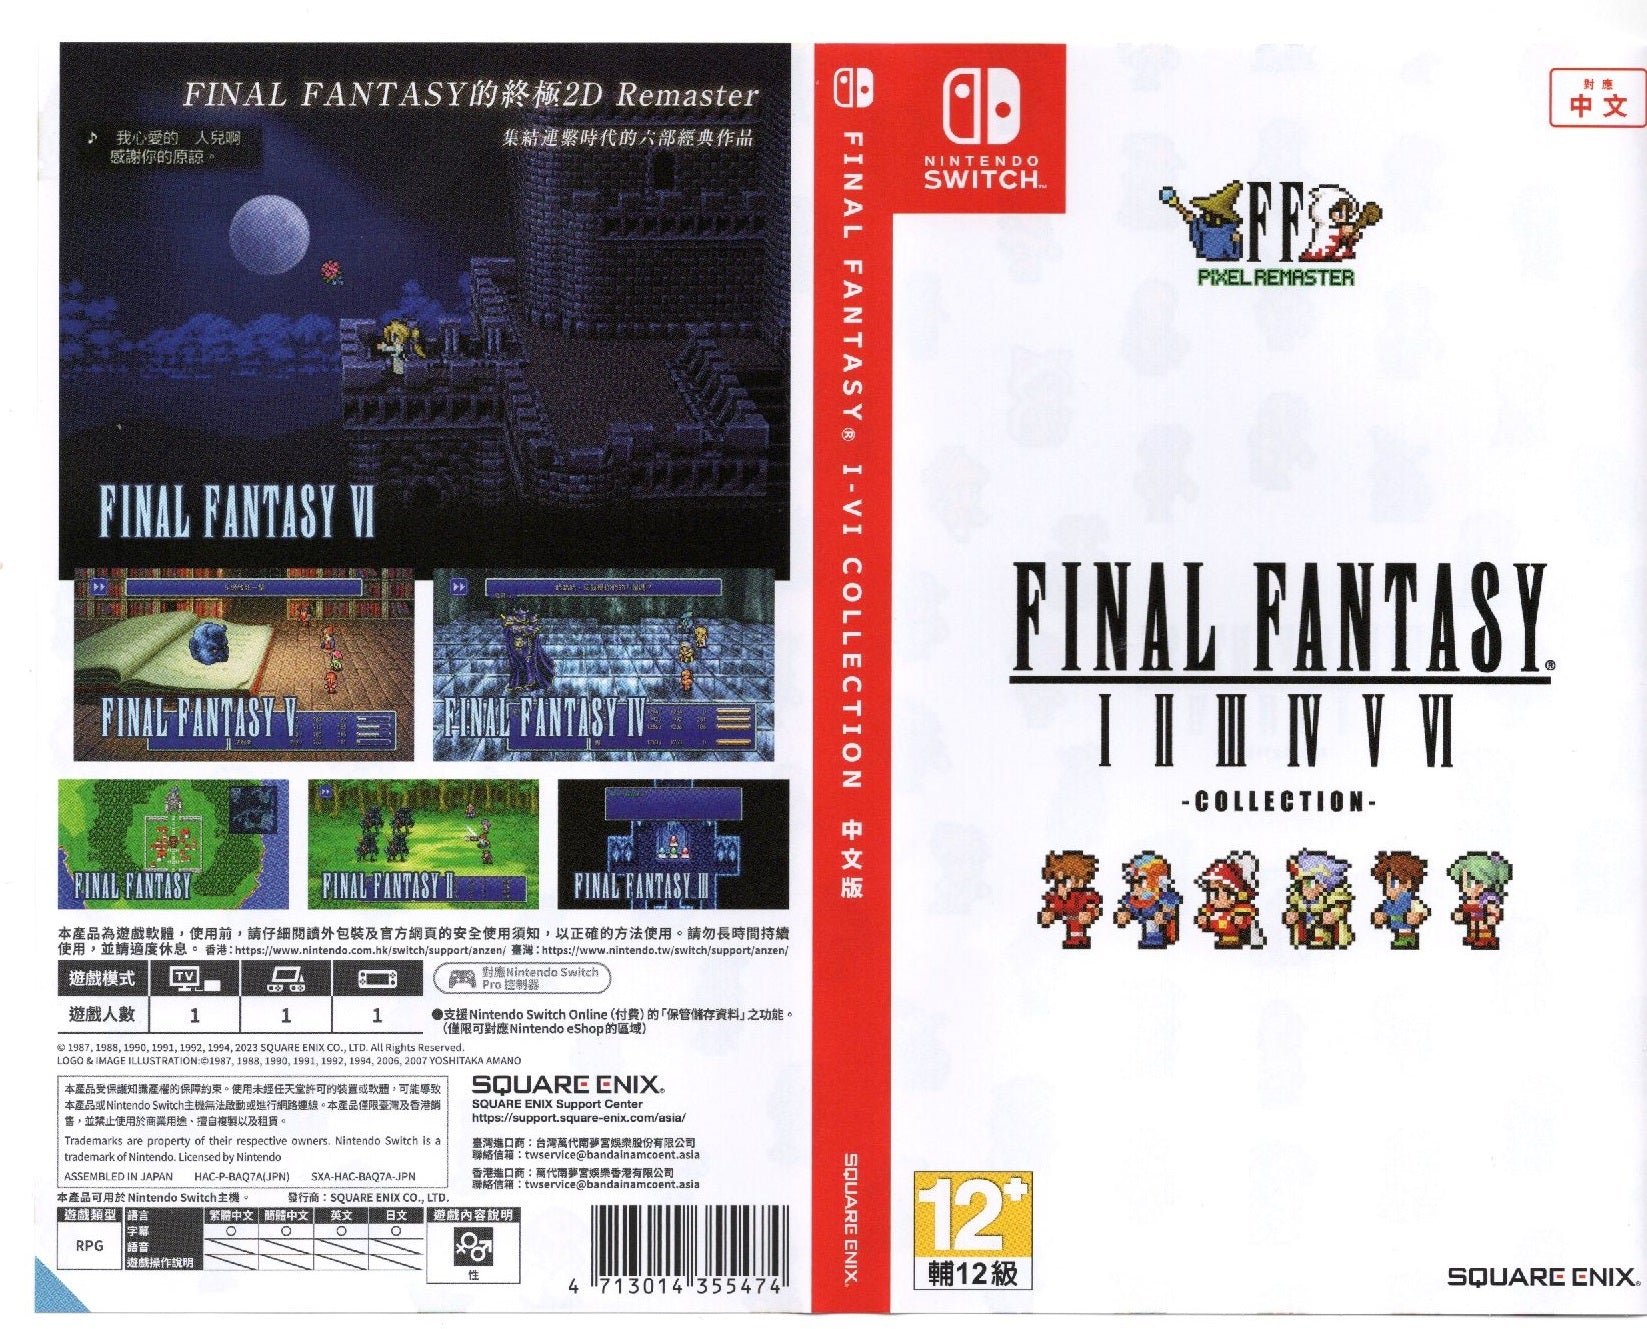 FF-Pixel-Frame-switch-no-english-cover